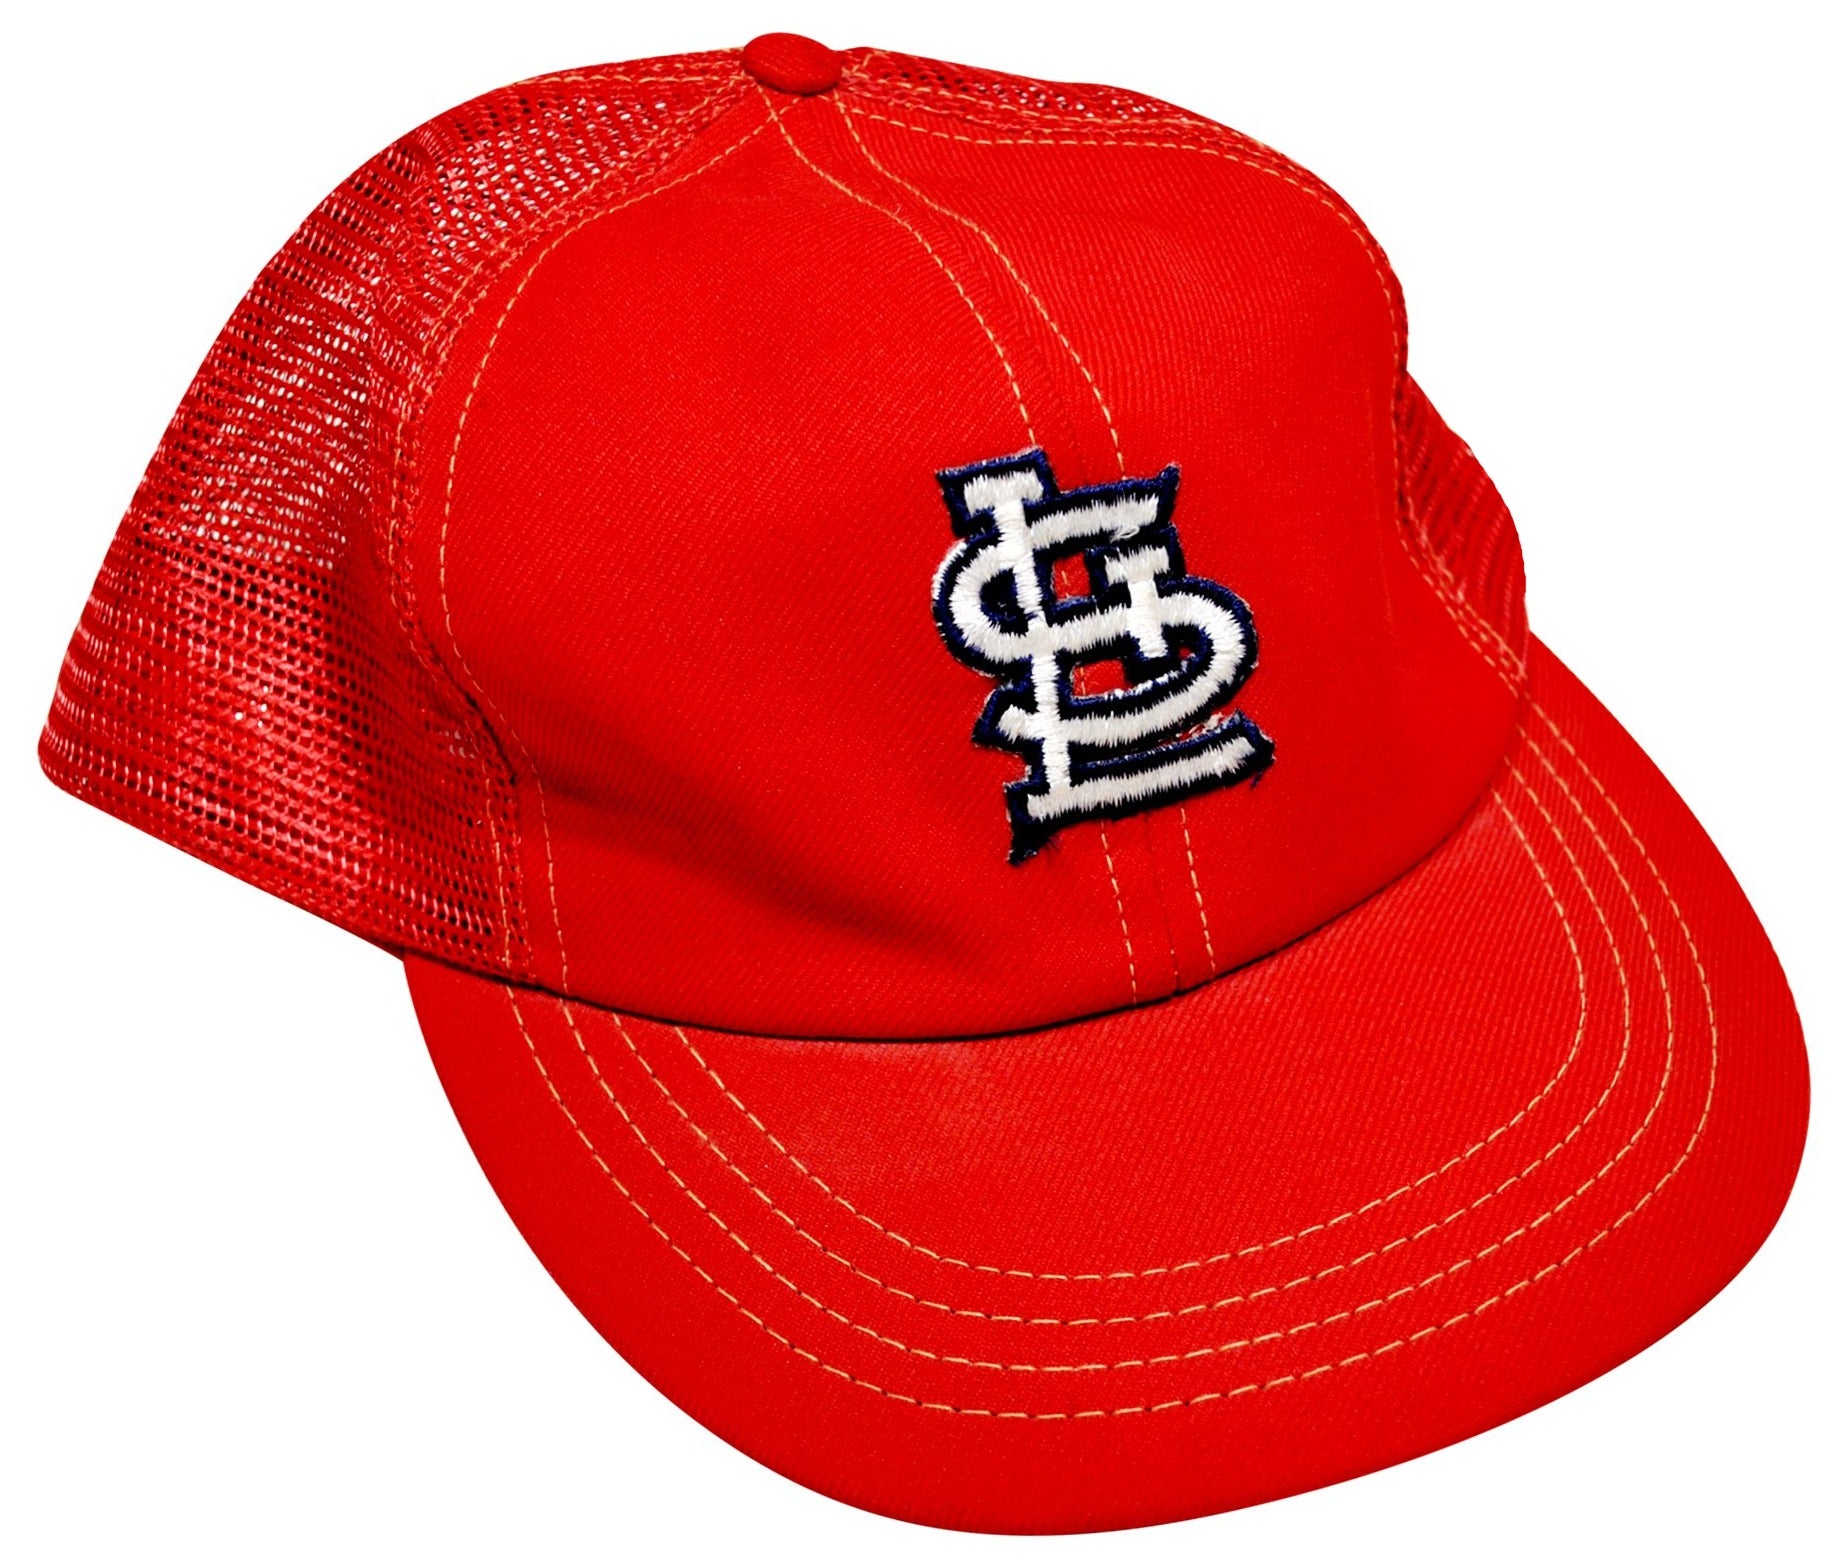 St. Louis Cardinals Game Issued Red Hat 8 DP45121